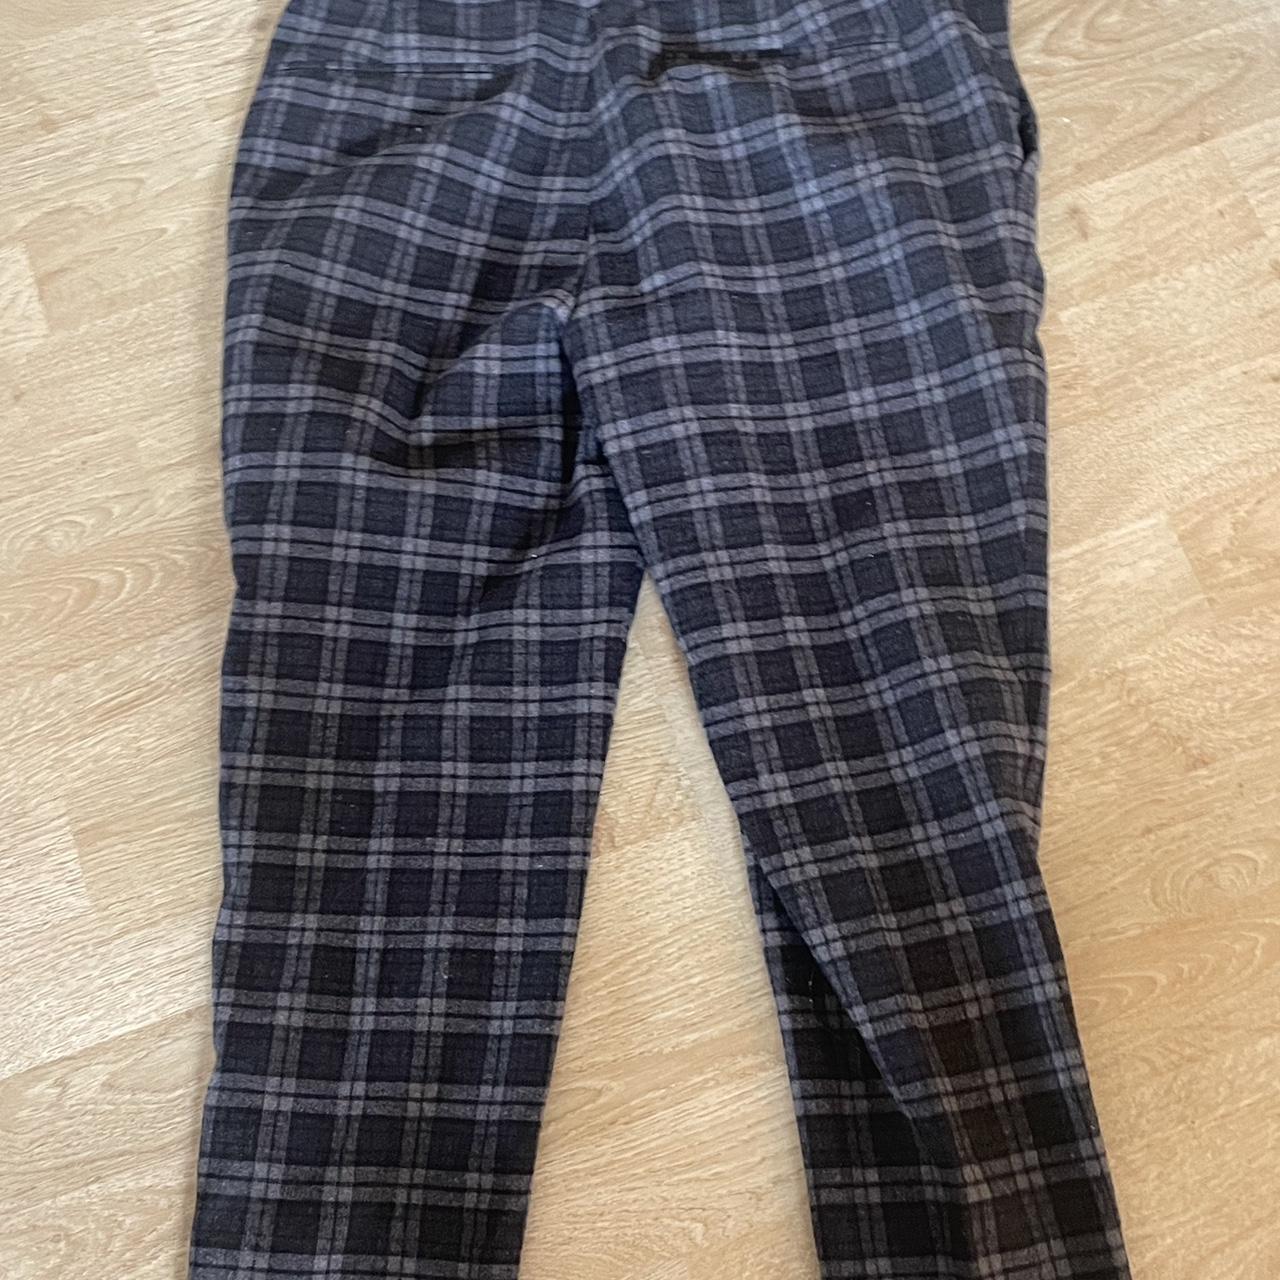 Smart trousers, just too fat now. skinny fit - Depop